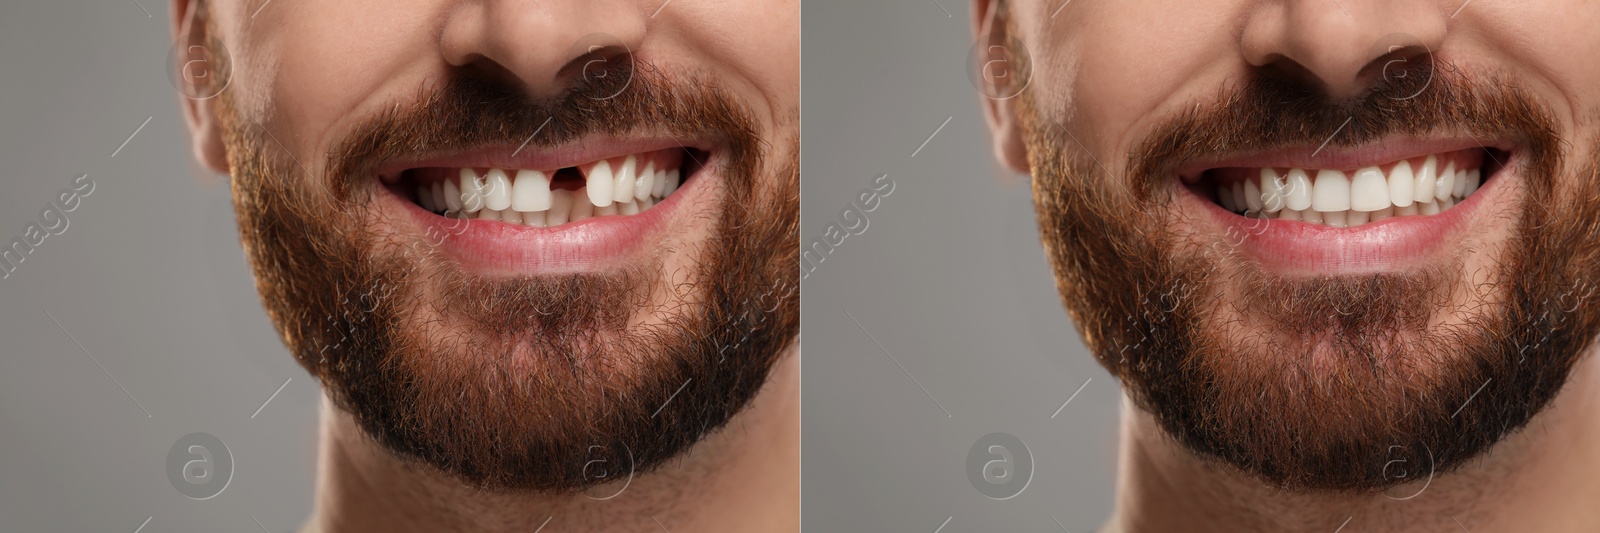 Image of Man showing teeth before and after dental implant surgery, closeup. Collage of photos on grey background